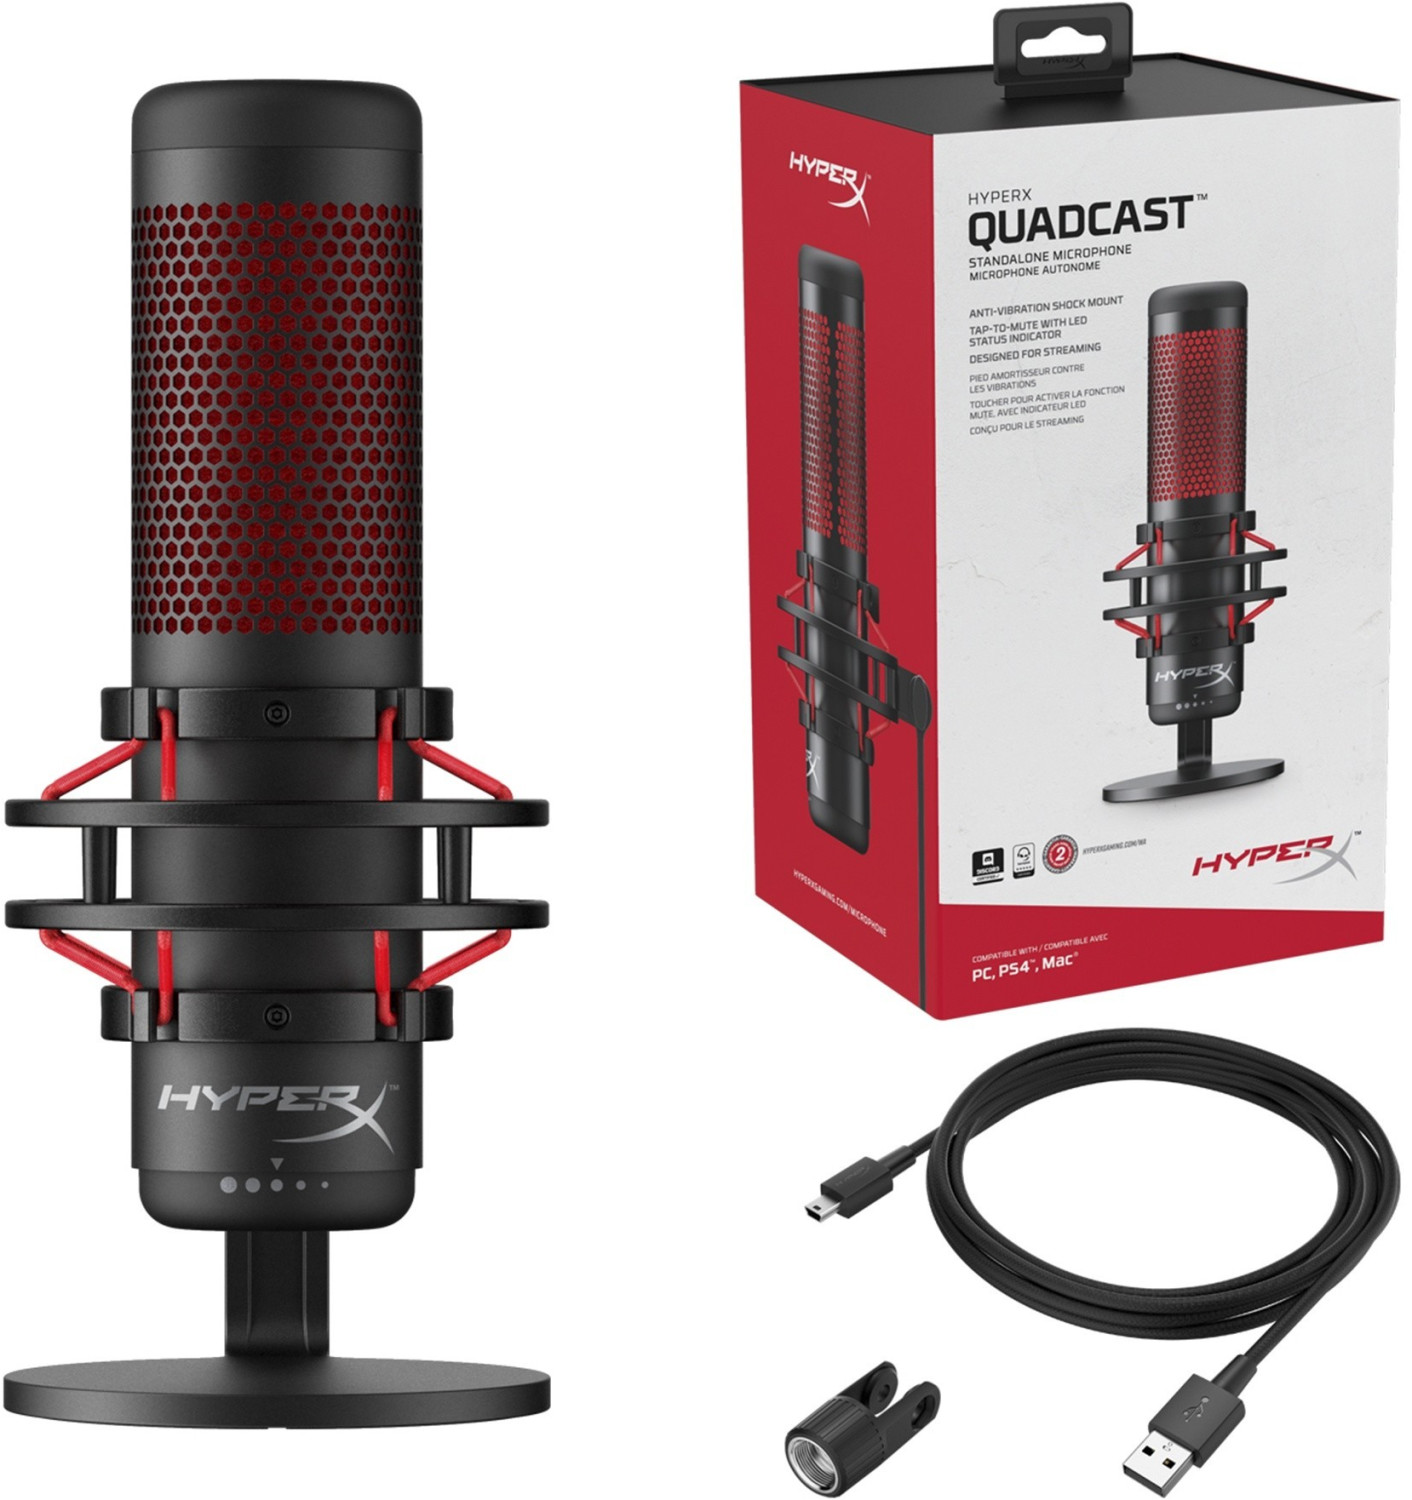 Microphone Gaming filaire Trust GXT 255+ Onyx Professionnel Noir -  Microphone - Achat & prix